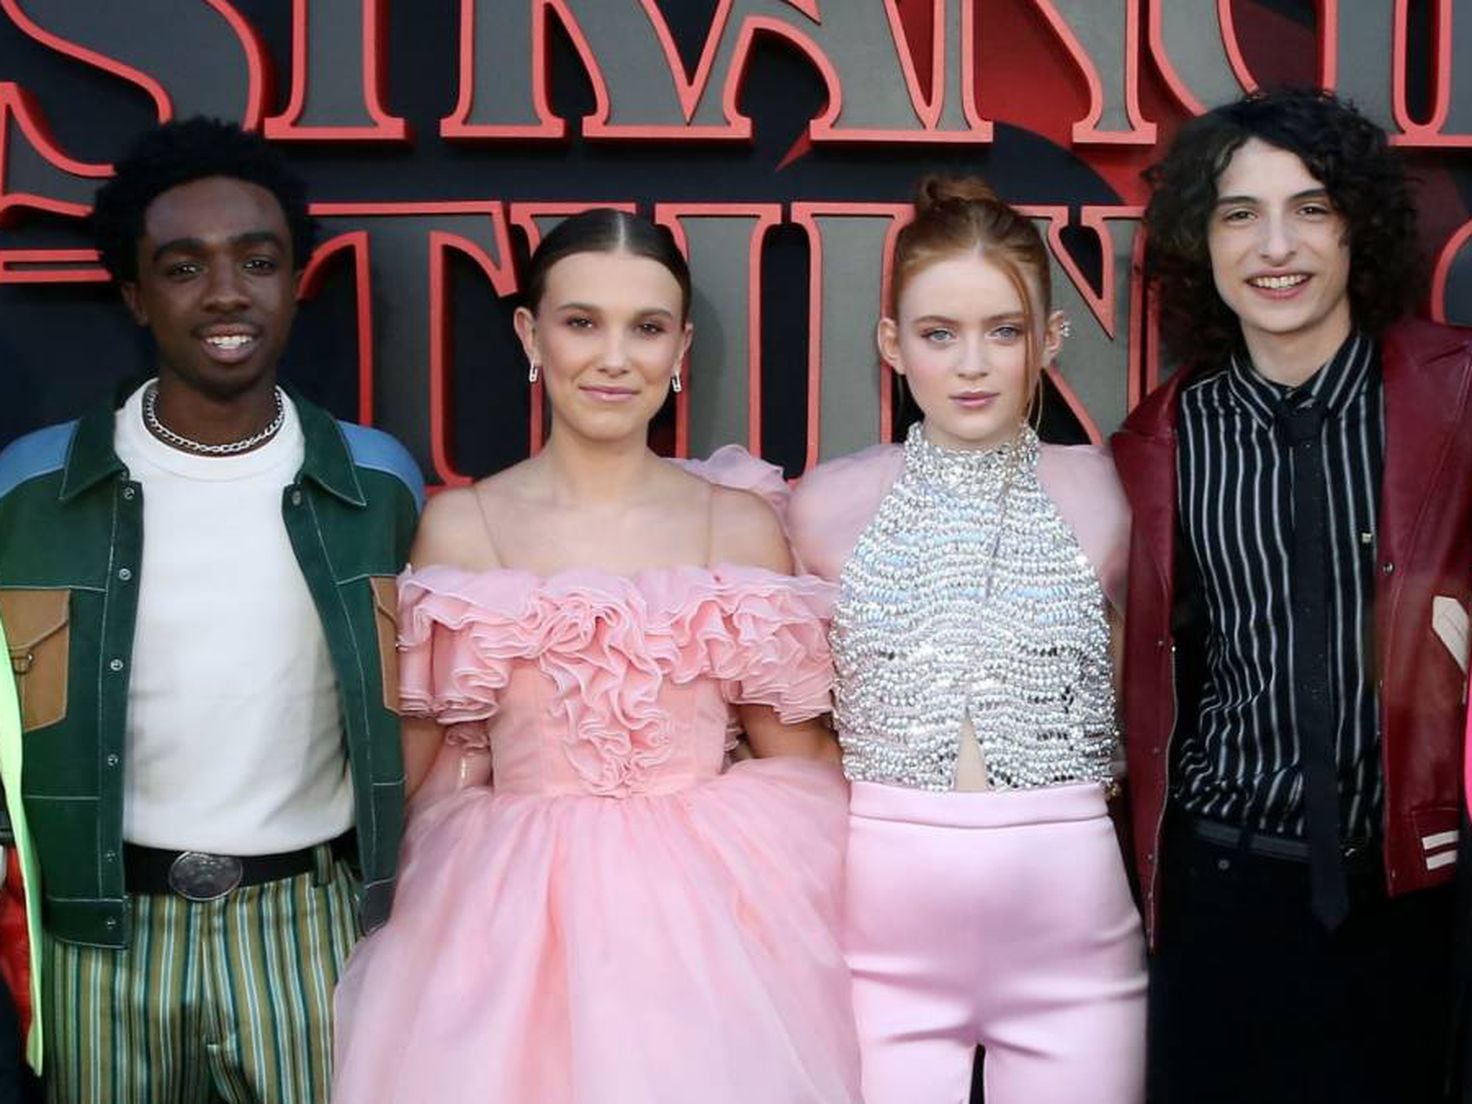 Will there be a season 5 of Stranger Things? - AS USA